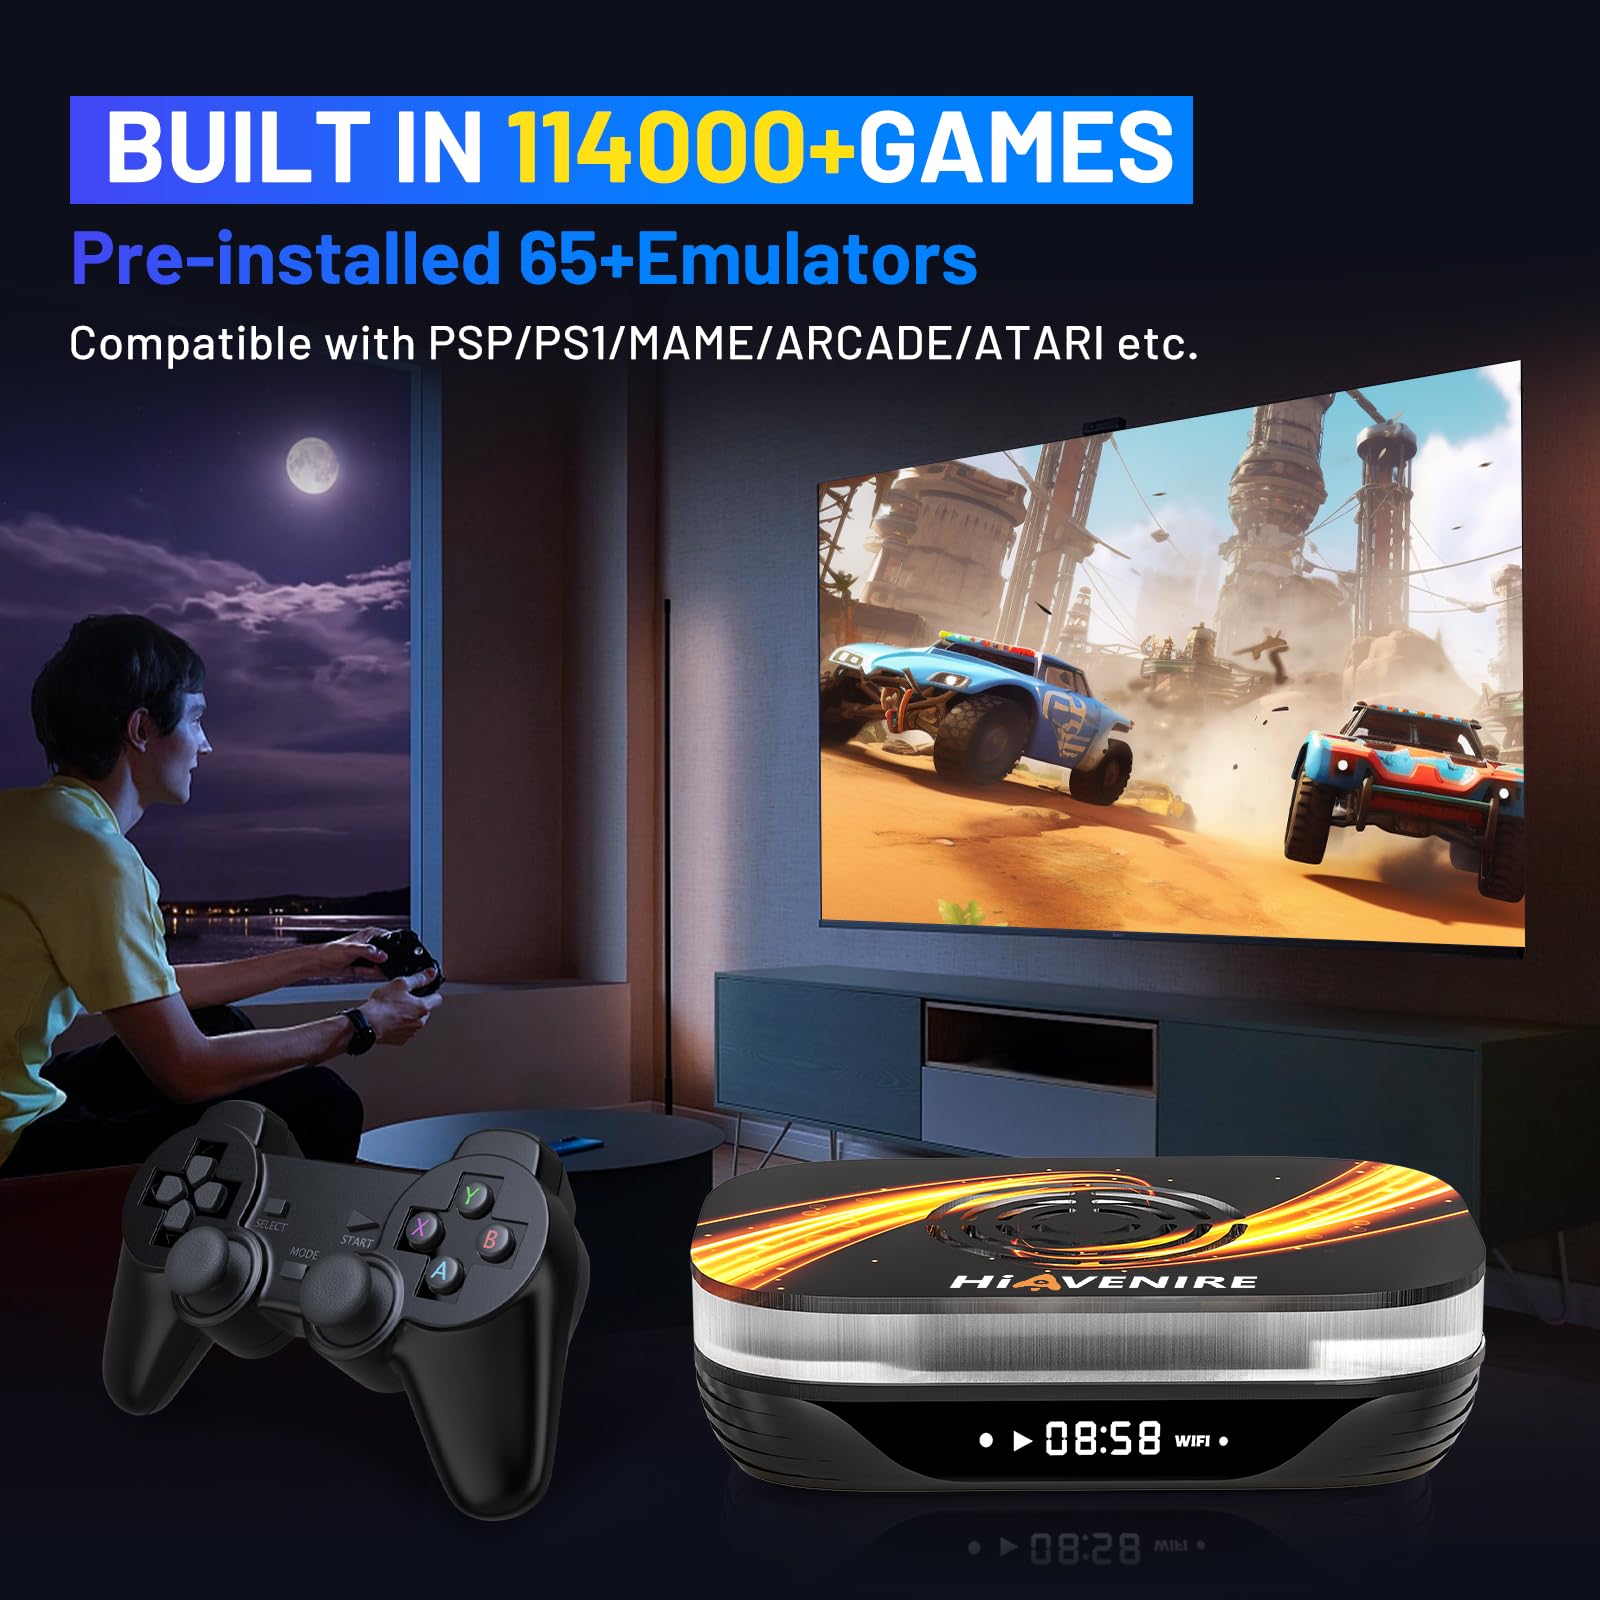 HiAvenire Super Console X3 Plus Retro Game Console Pre-Installed in 114000+ Games, Android 9.0 and Emuelec 4.5 Game System in 1, s905X3 Chip,with 2 Gamepads(256G)